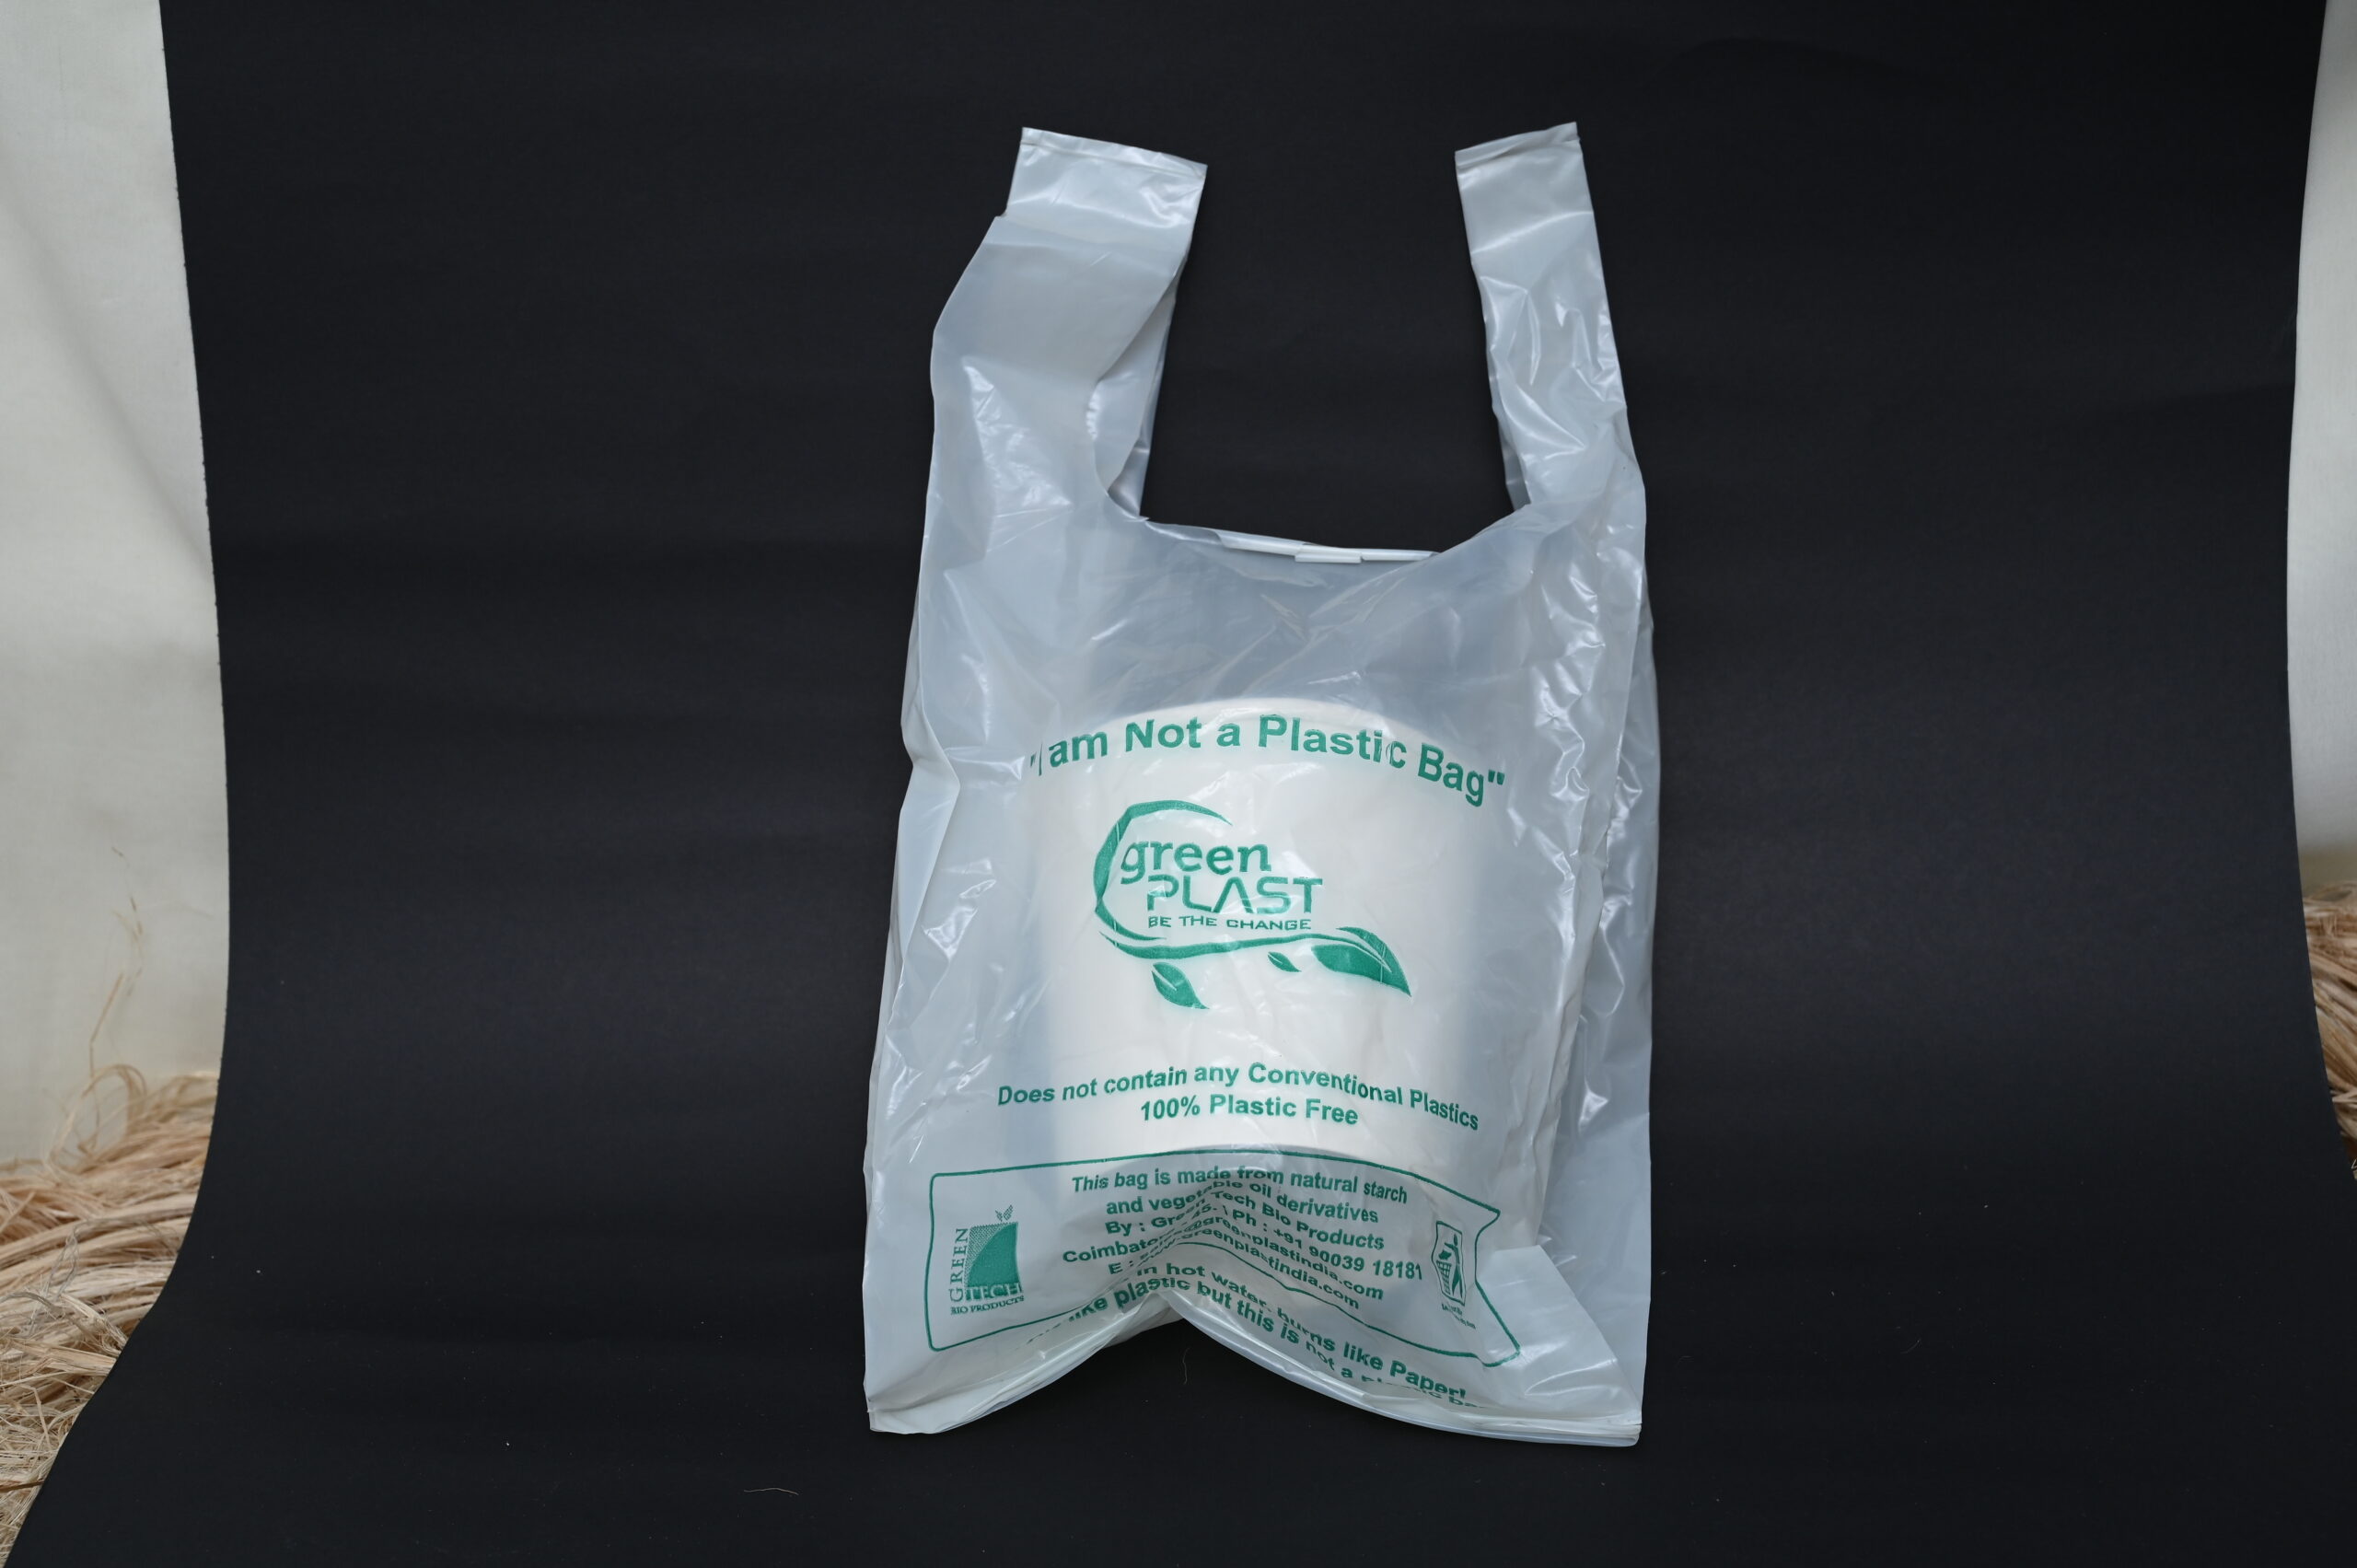 Facts about compostable bags | Ethical Consumer